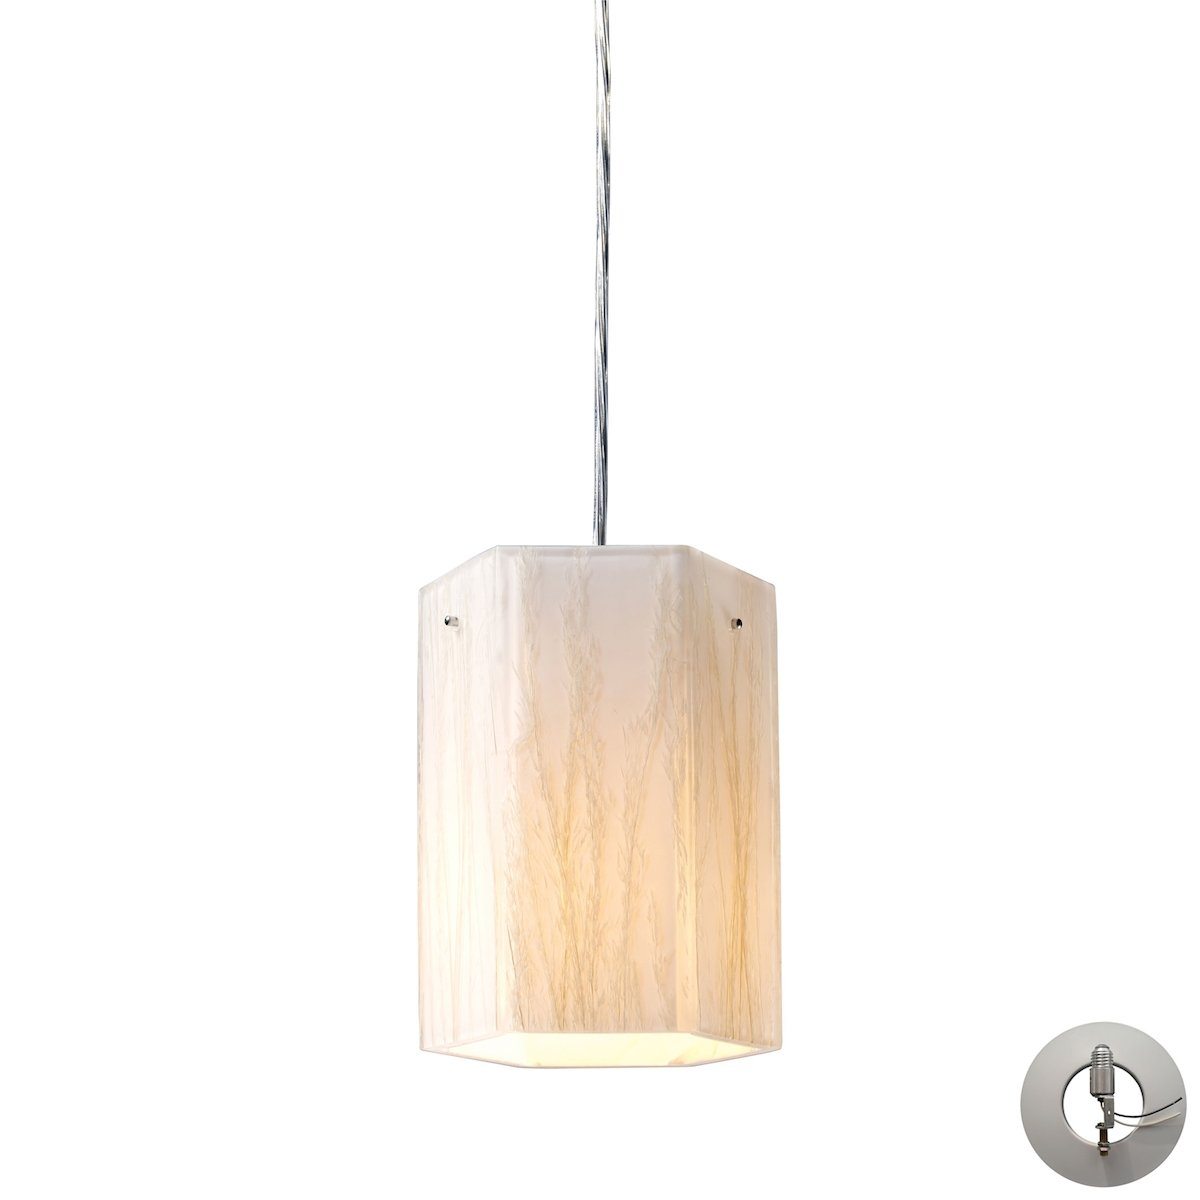 Modern Organics Pendant In Polished Chrome And White Sawgrass - Includes Recessed Lighting Kit Ceiling Elk Lighting 